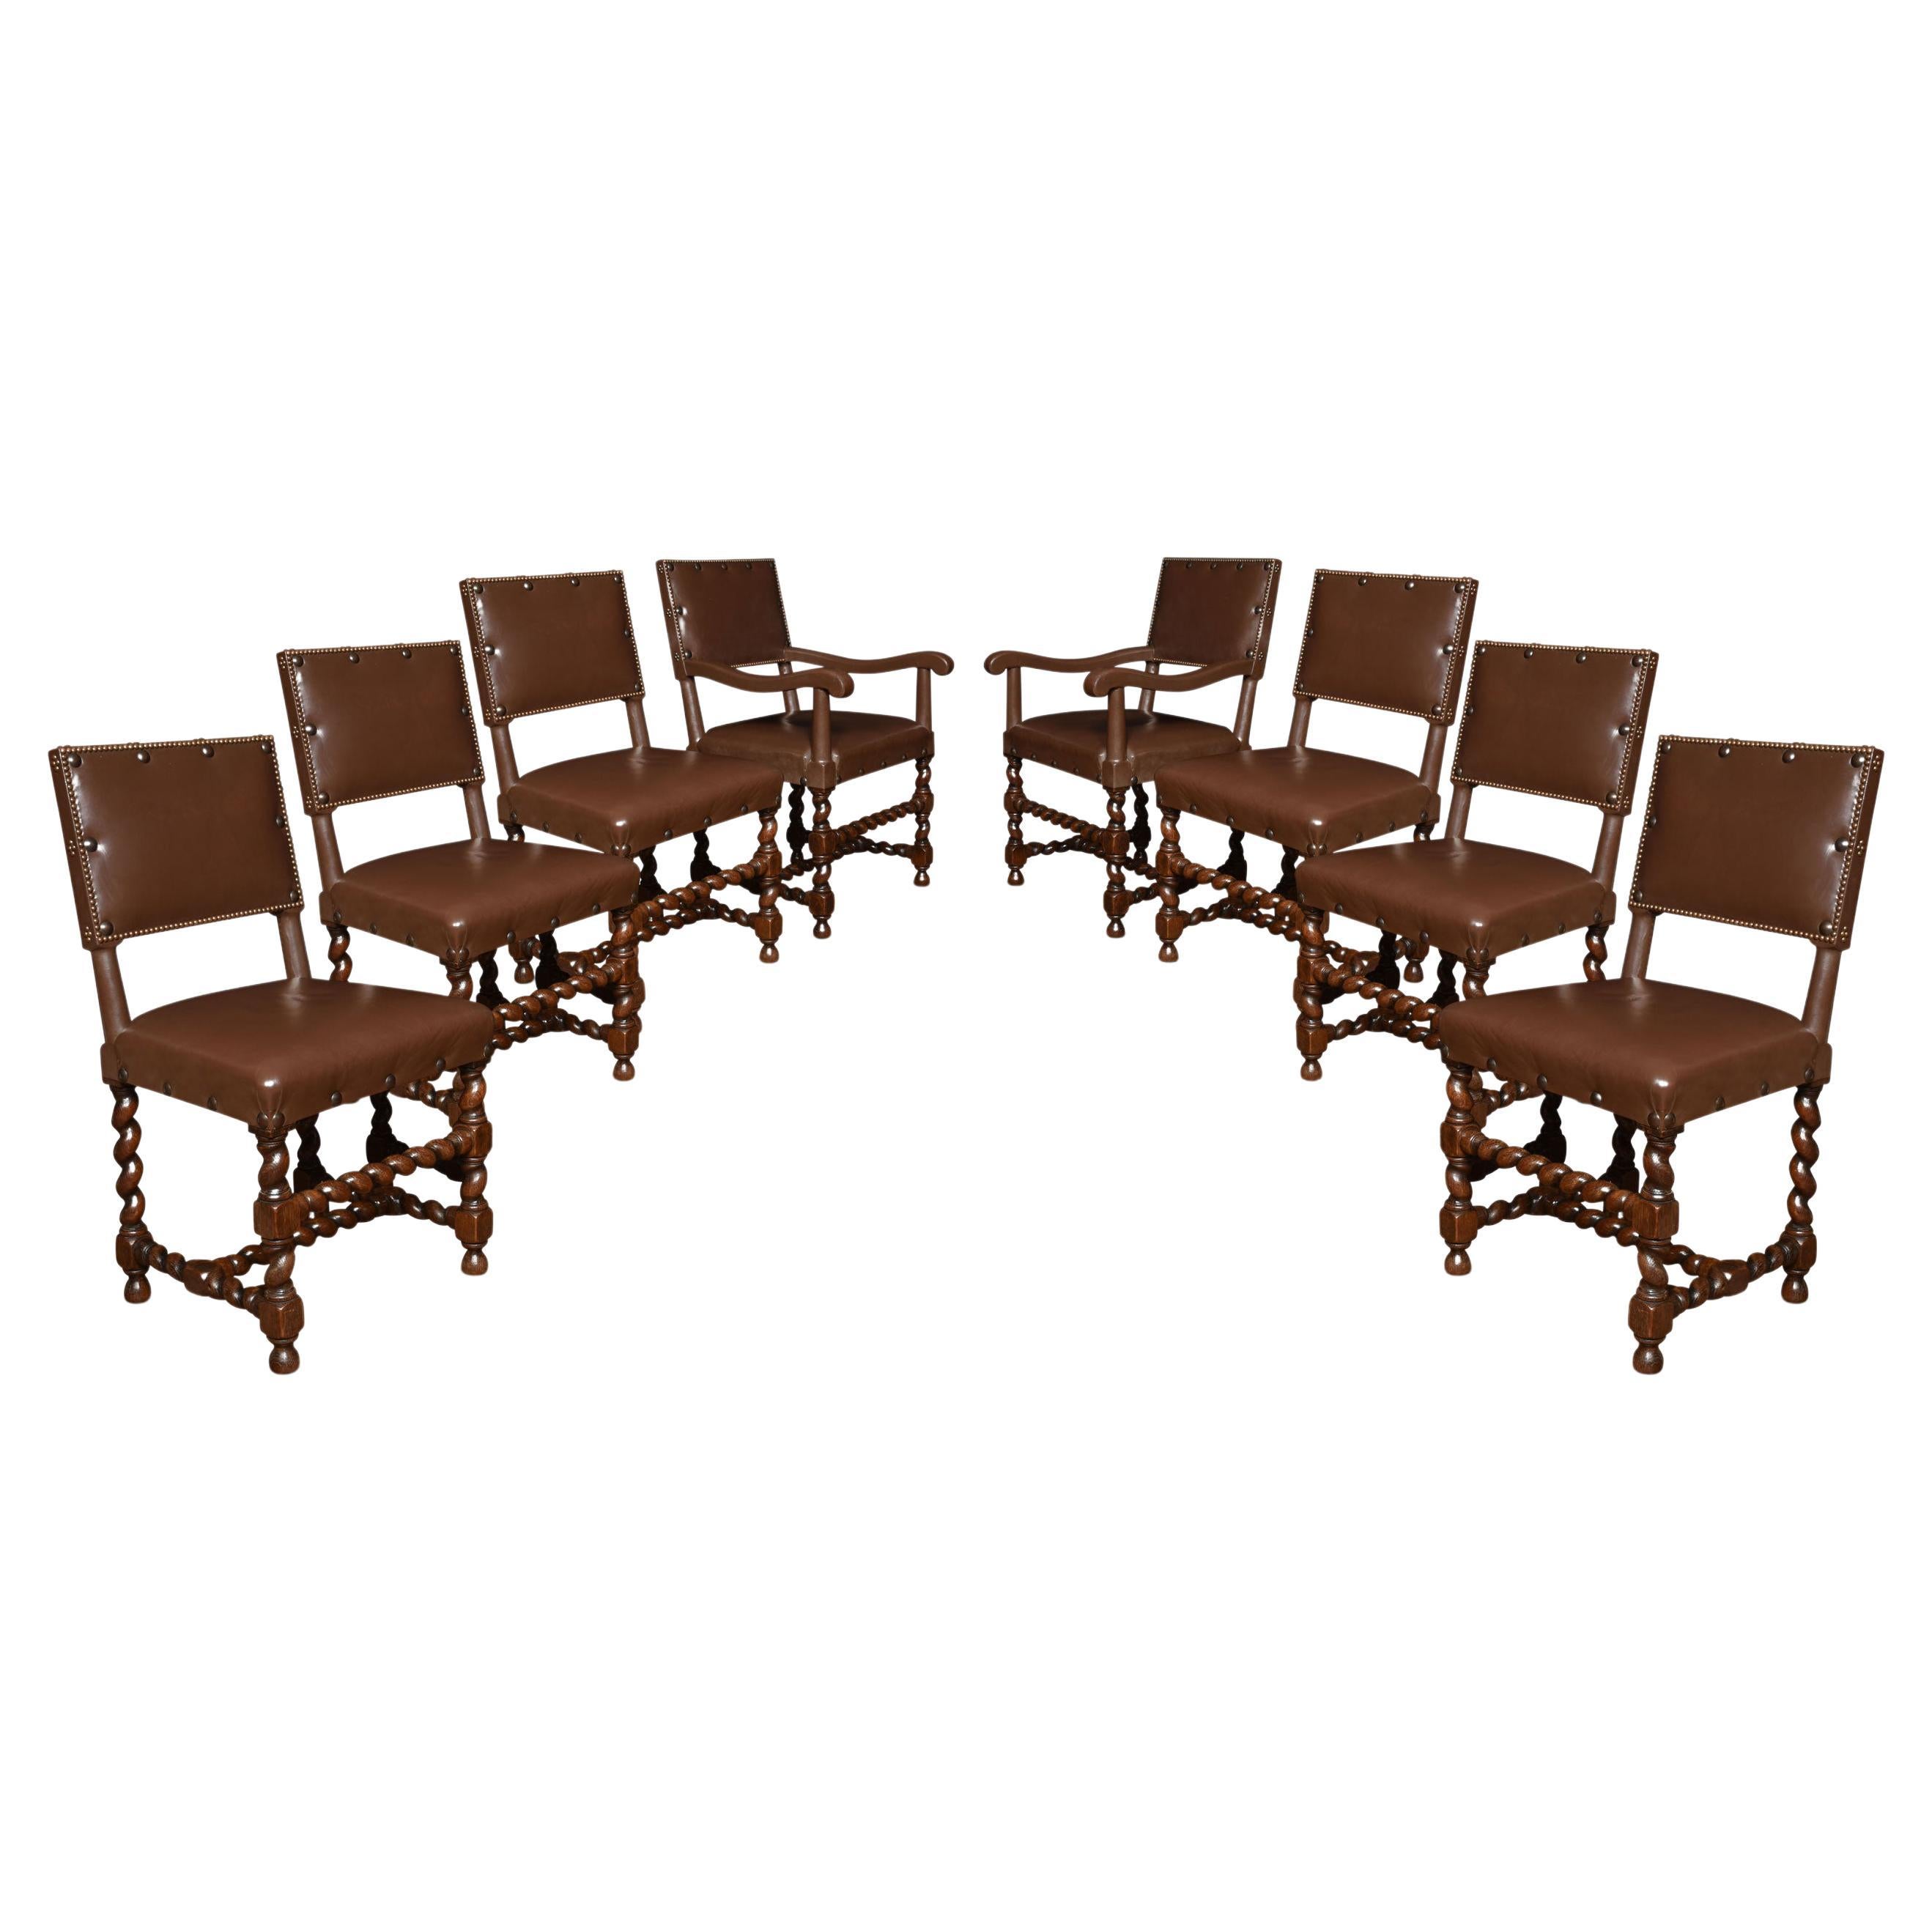 Eight Leather Upholstered Oak Dining Chairs